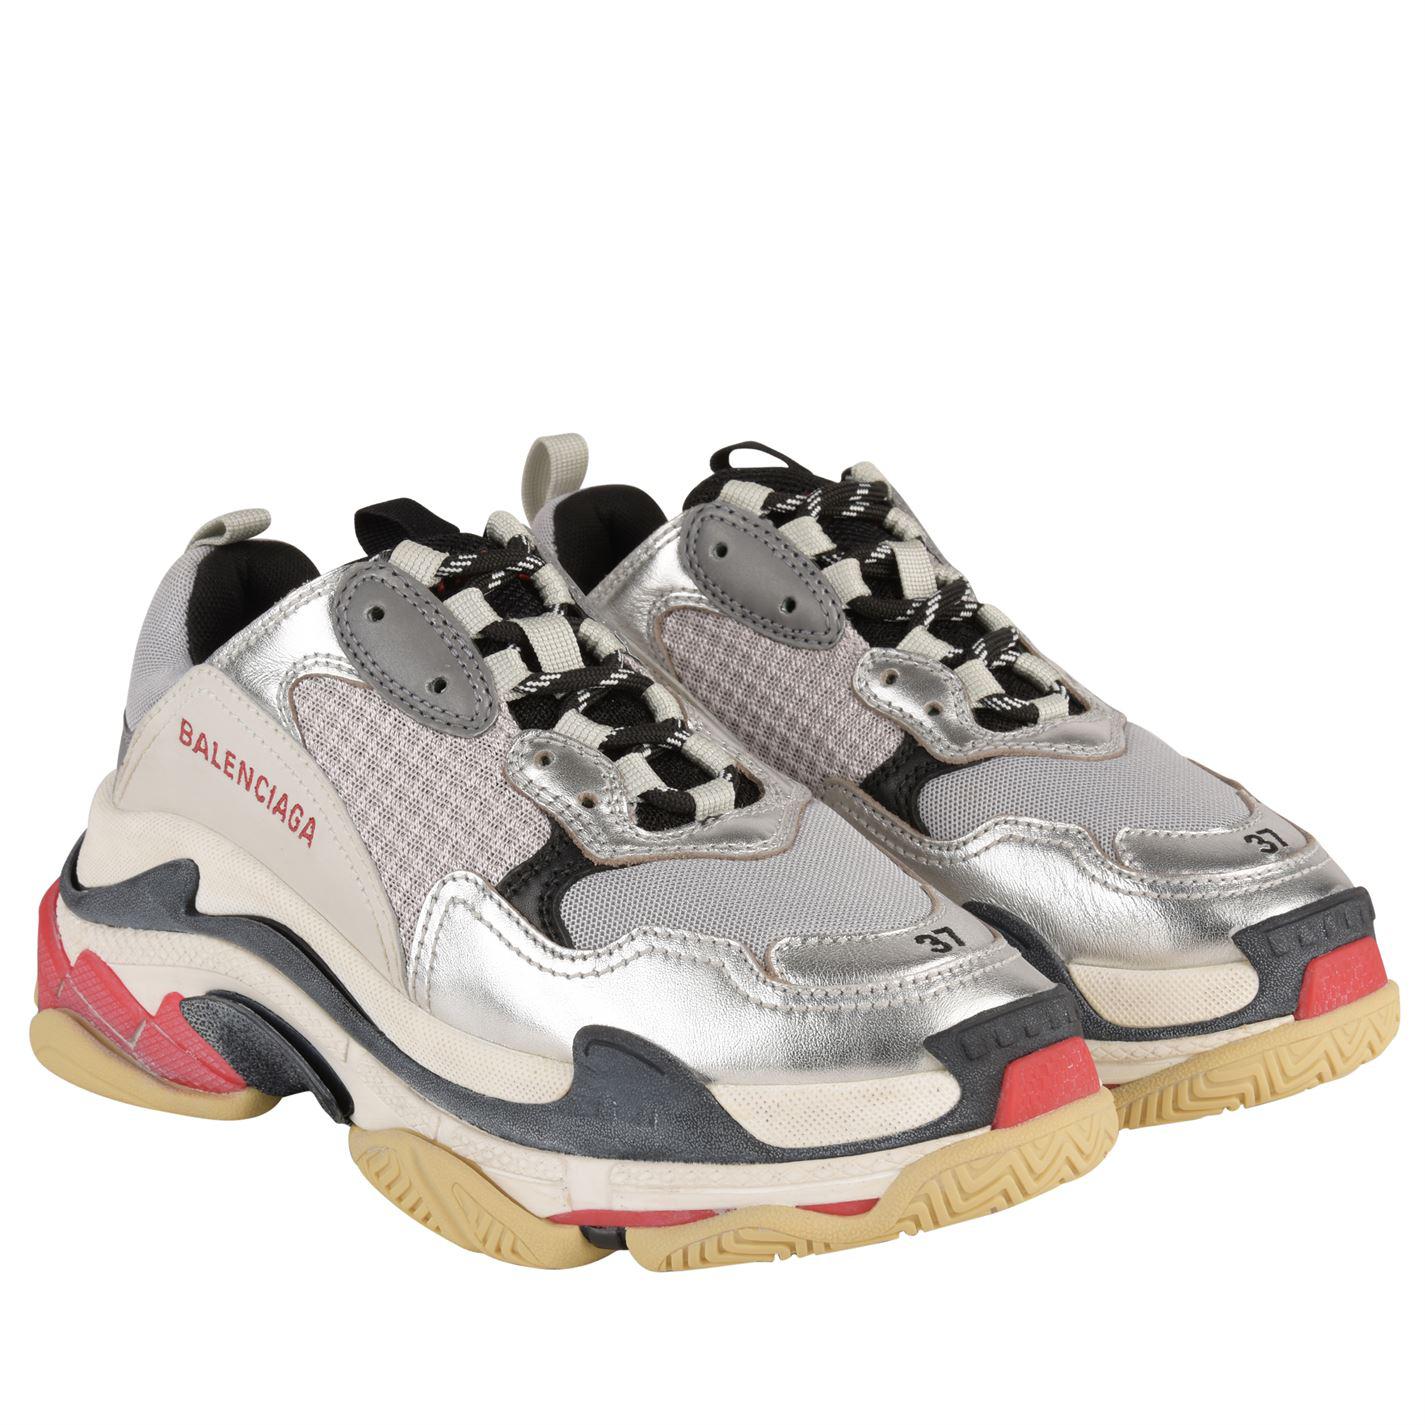 Beige Black Triple S Sneakers from the brand Balenciaga